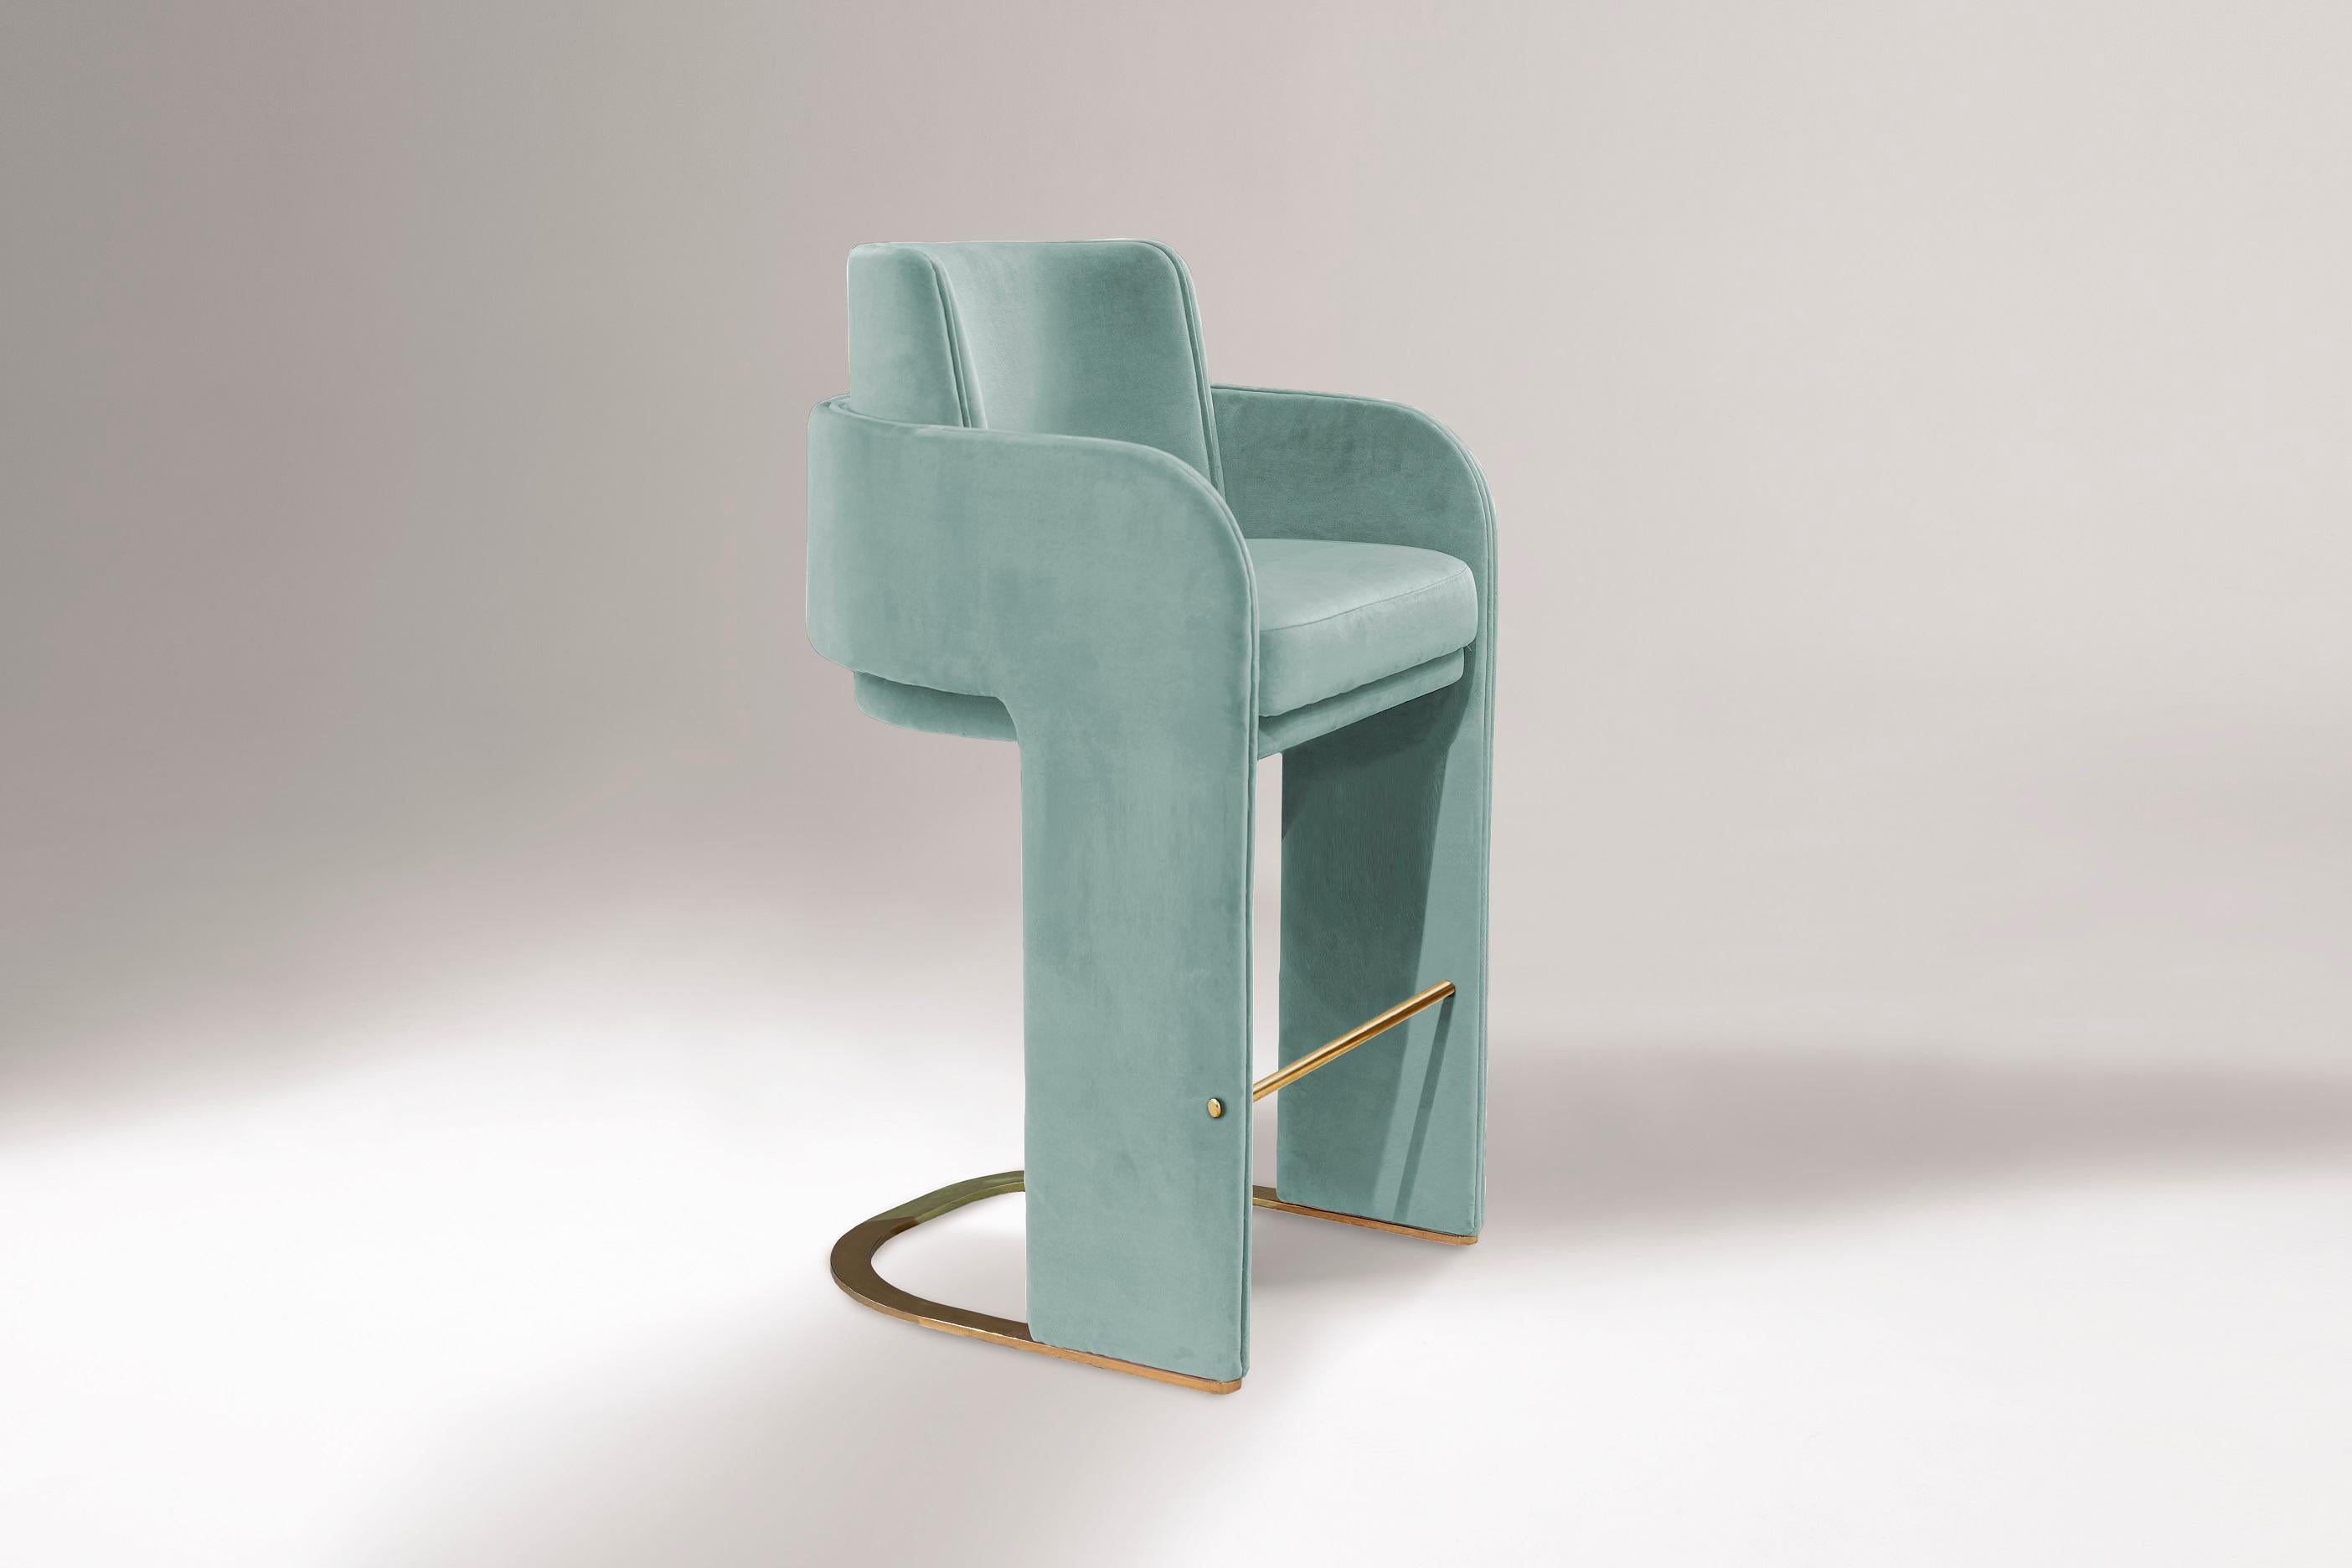 Odisseia counter chair embodies the aesthetic spirit of the space age, a new kind of discreet luxury and comfort inspired by a futuristic era created by new visual experiences and concepts of the future. This effortless but striking piece insinuates